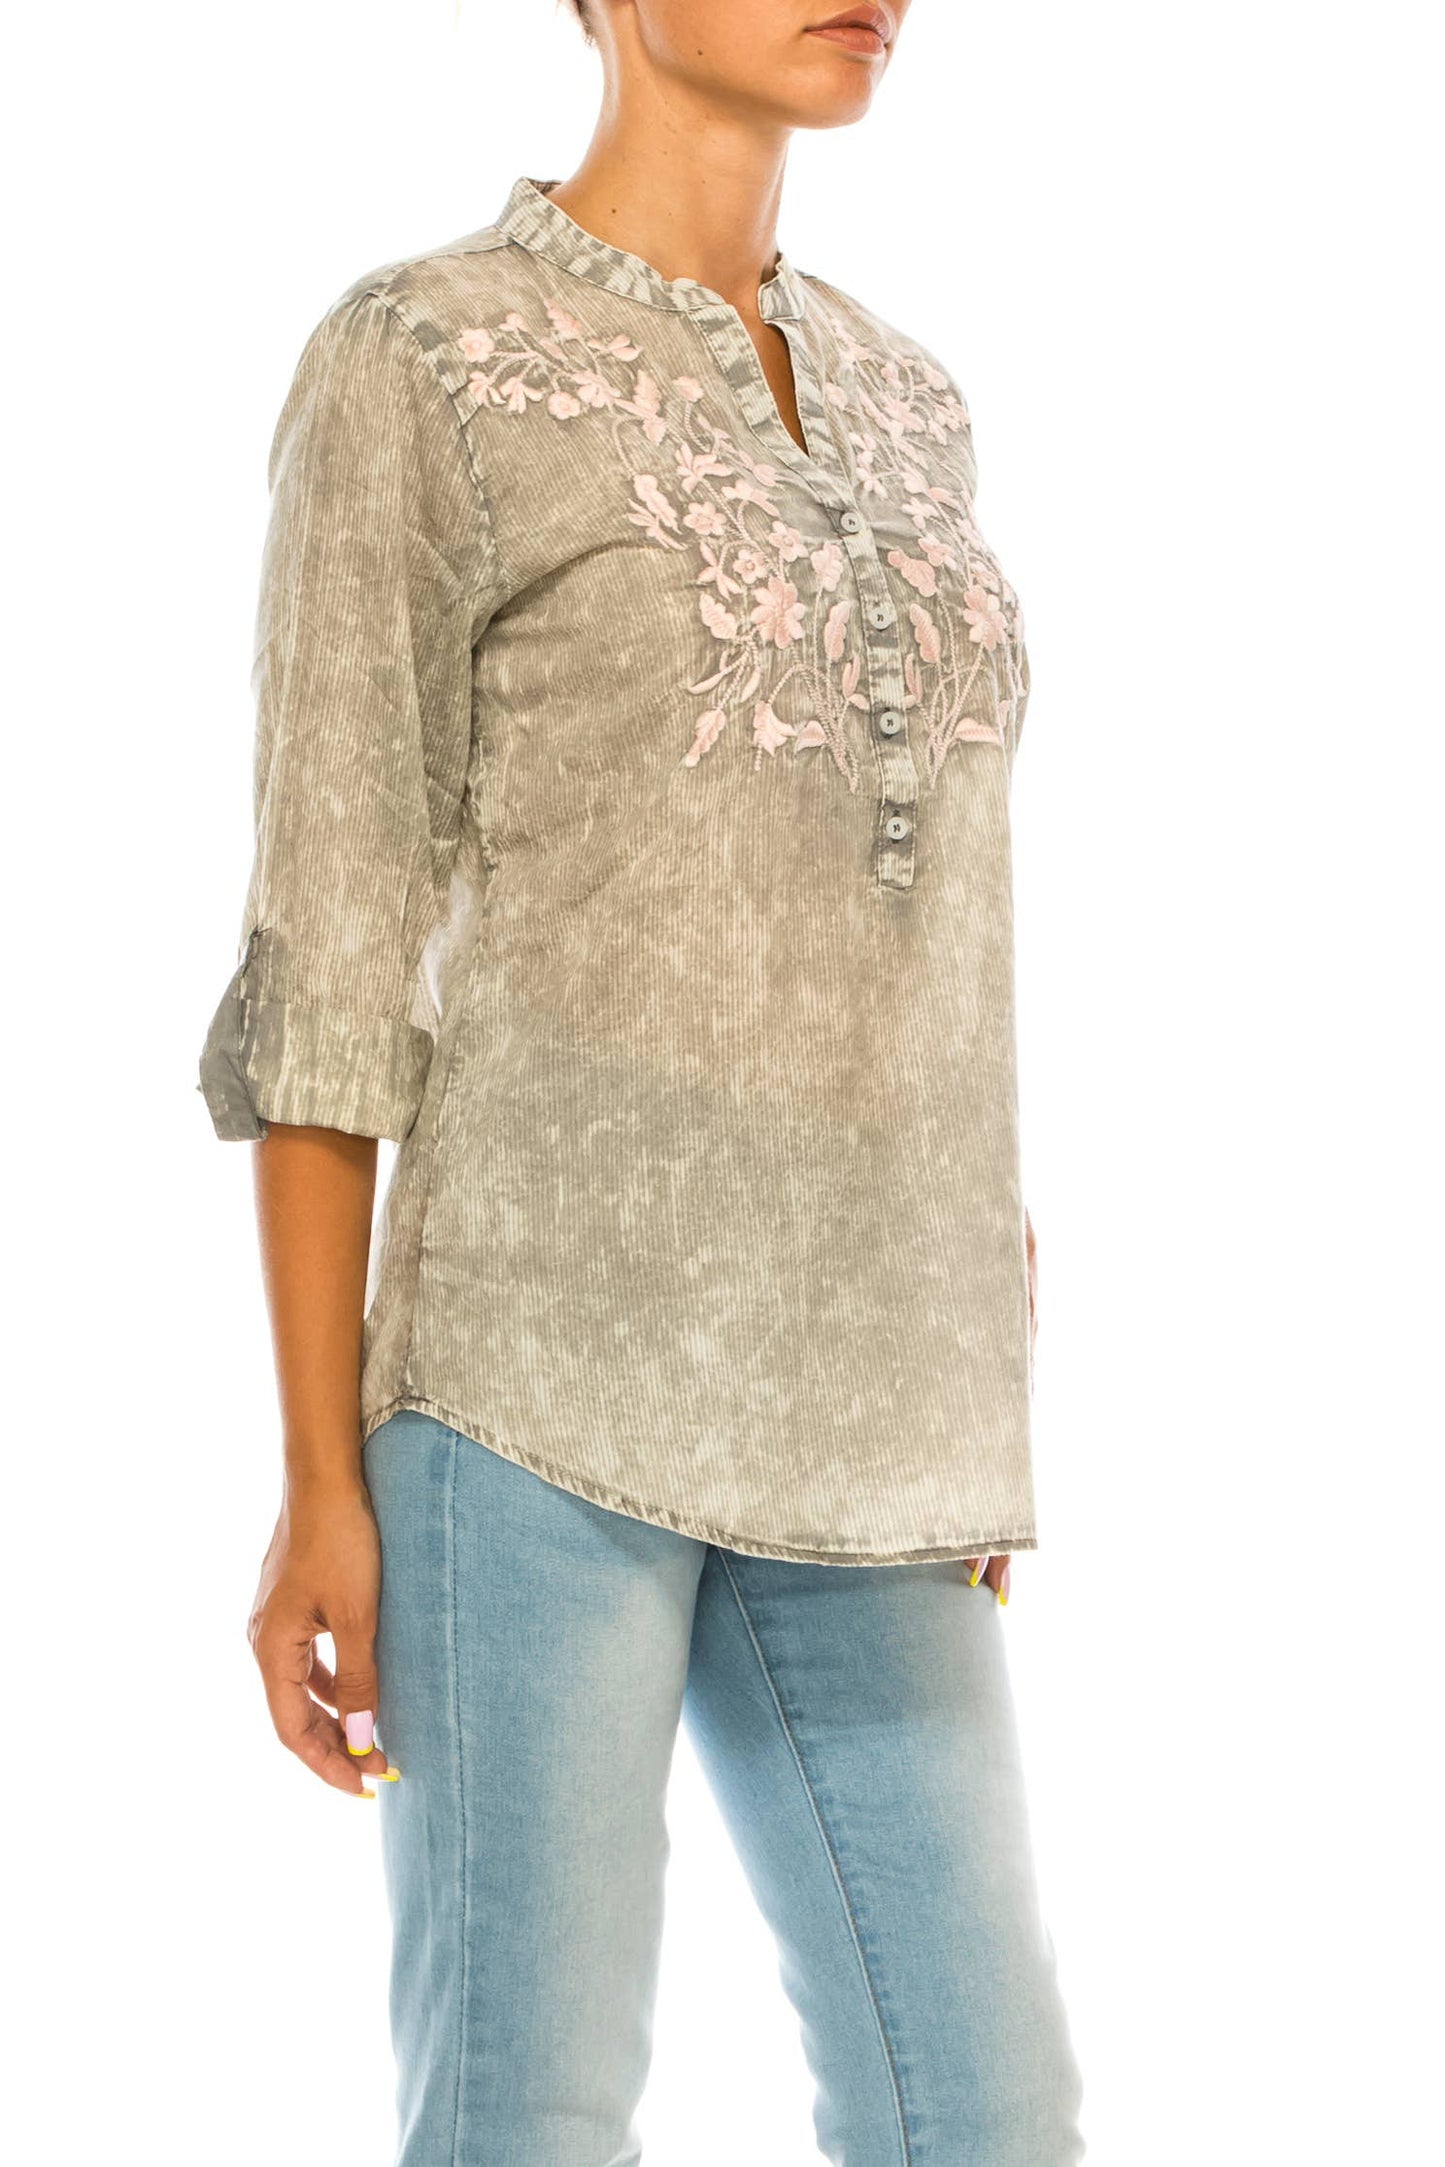 Vintage Half Button Down Tunic with Floral Embroidery